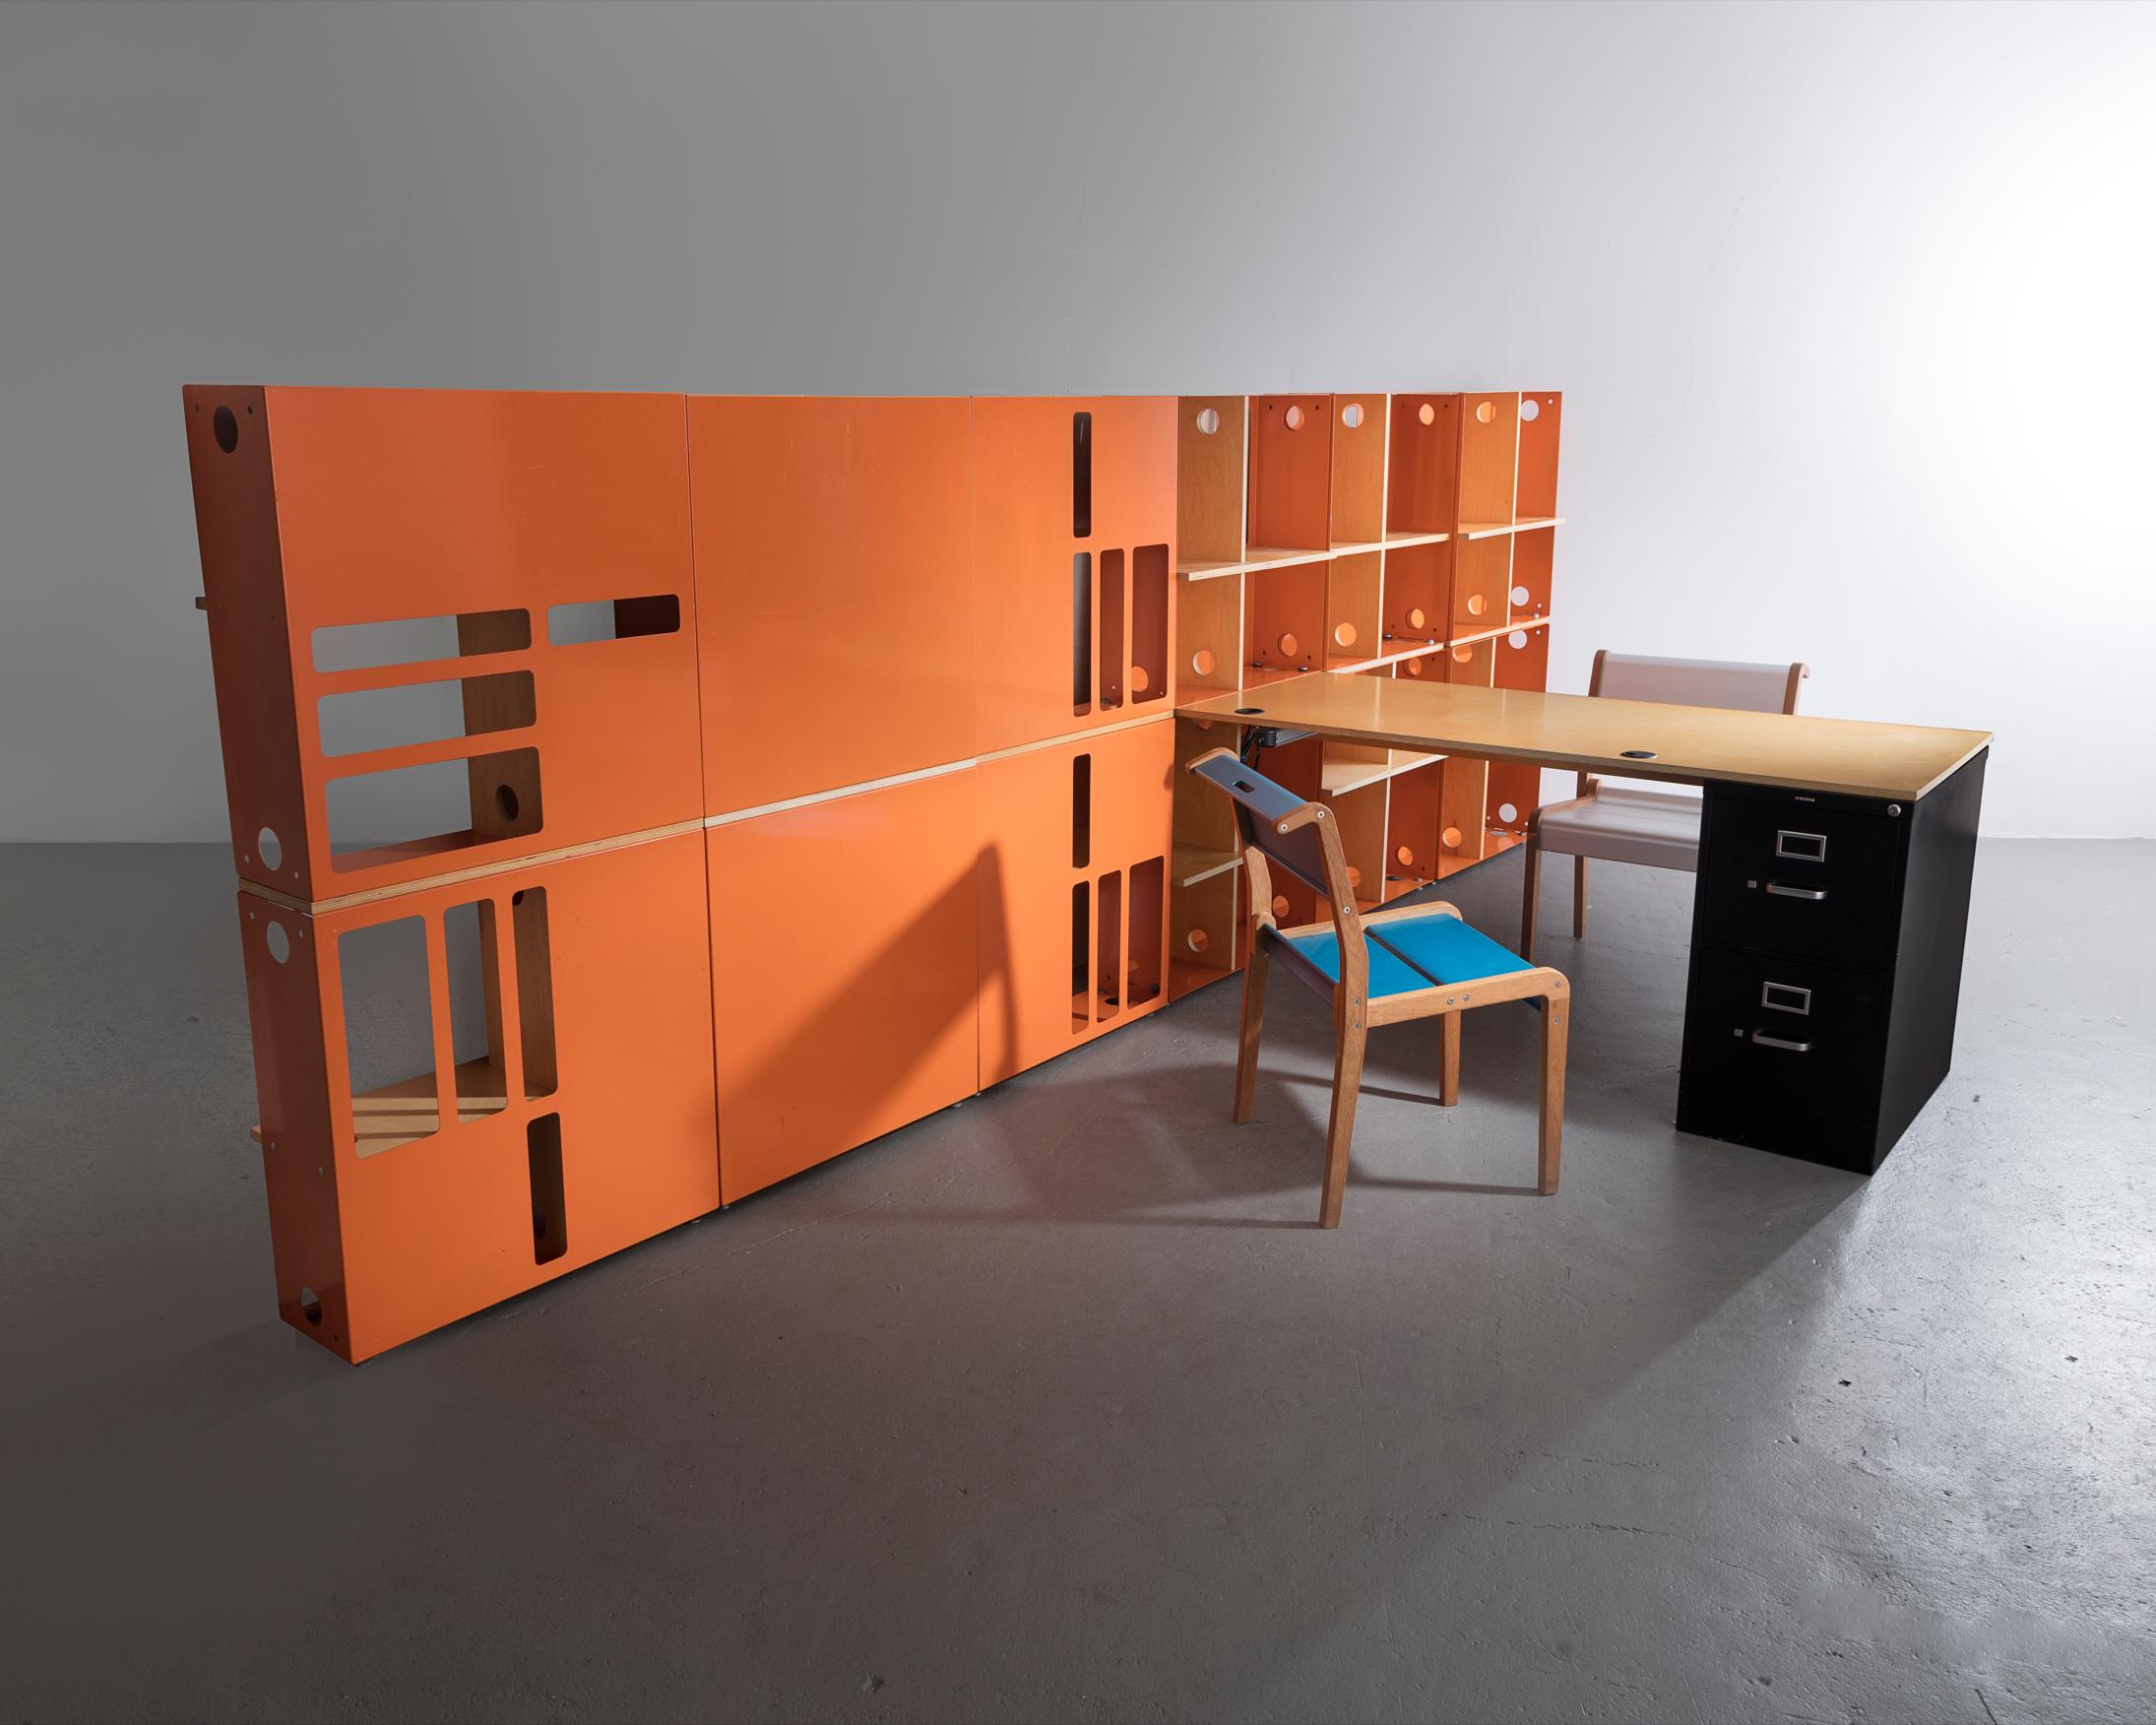 ICON shelving wall with built-in work station in painted metal. Dimensions are for a single module. Designed by Ali Tayar, 1999. Included in the 